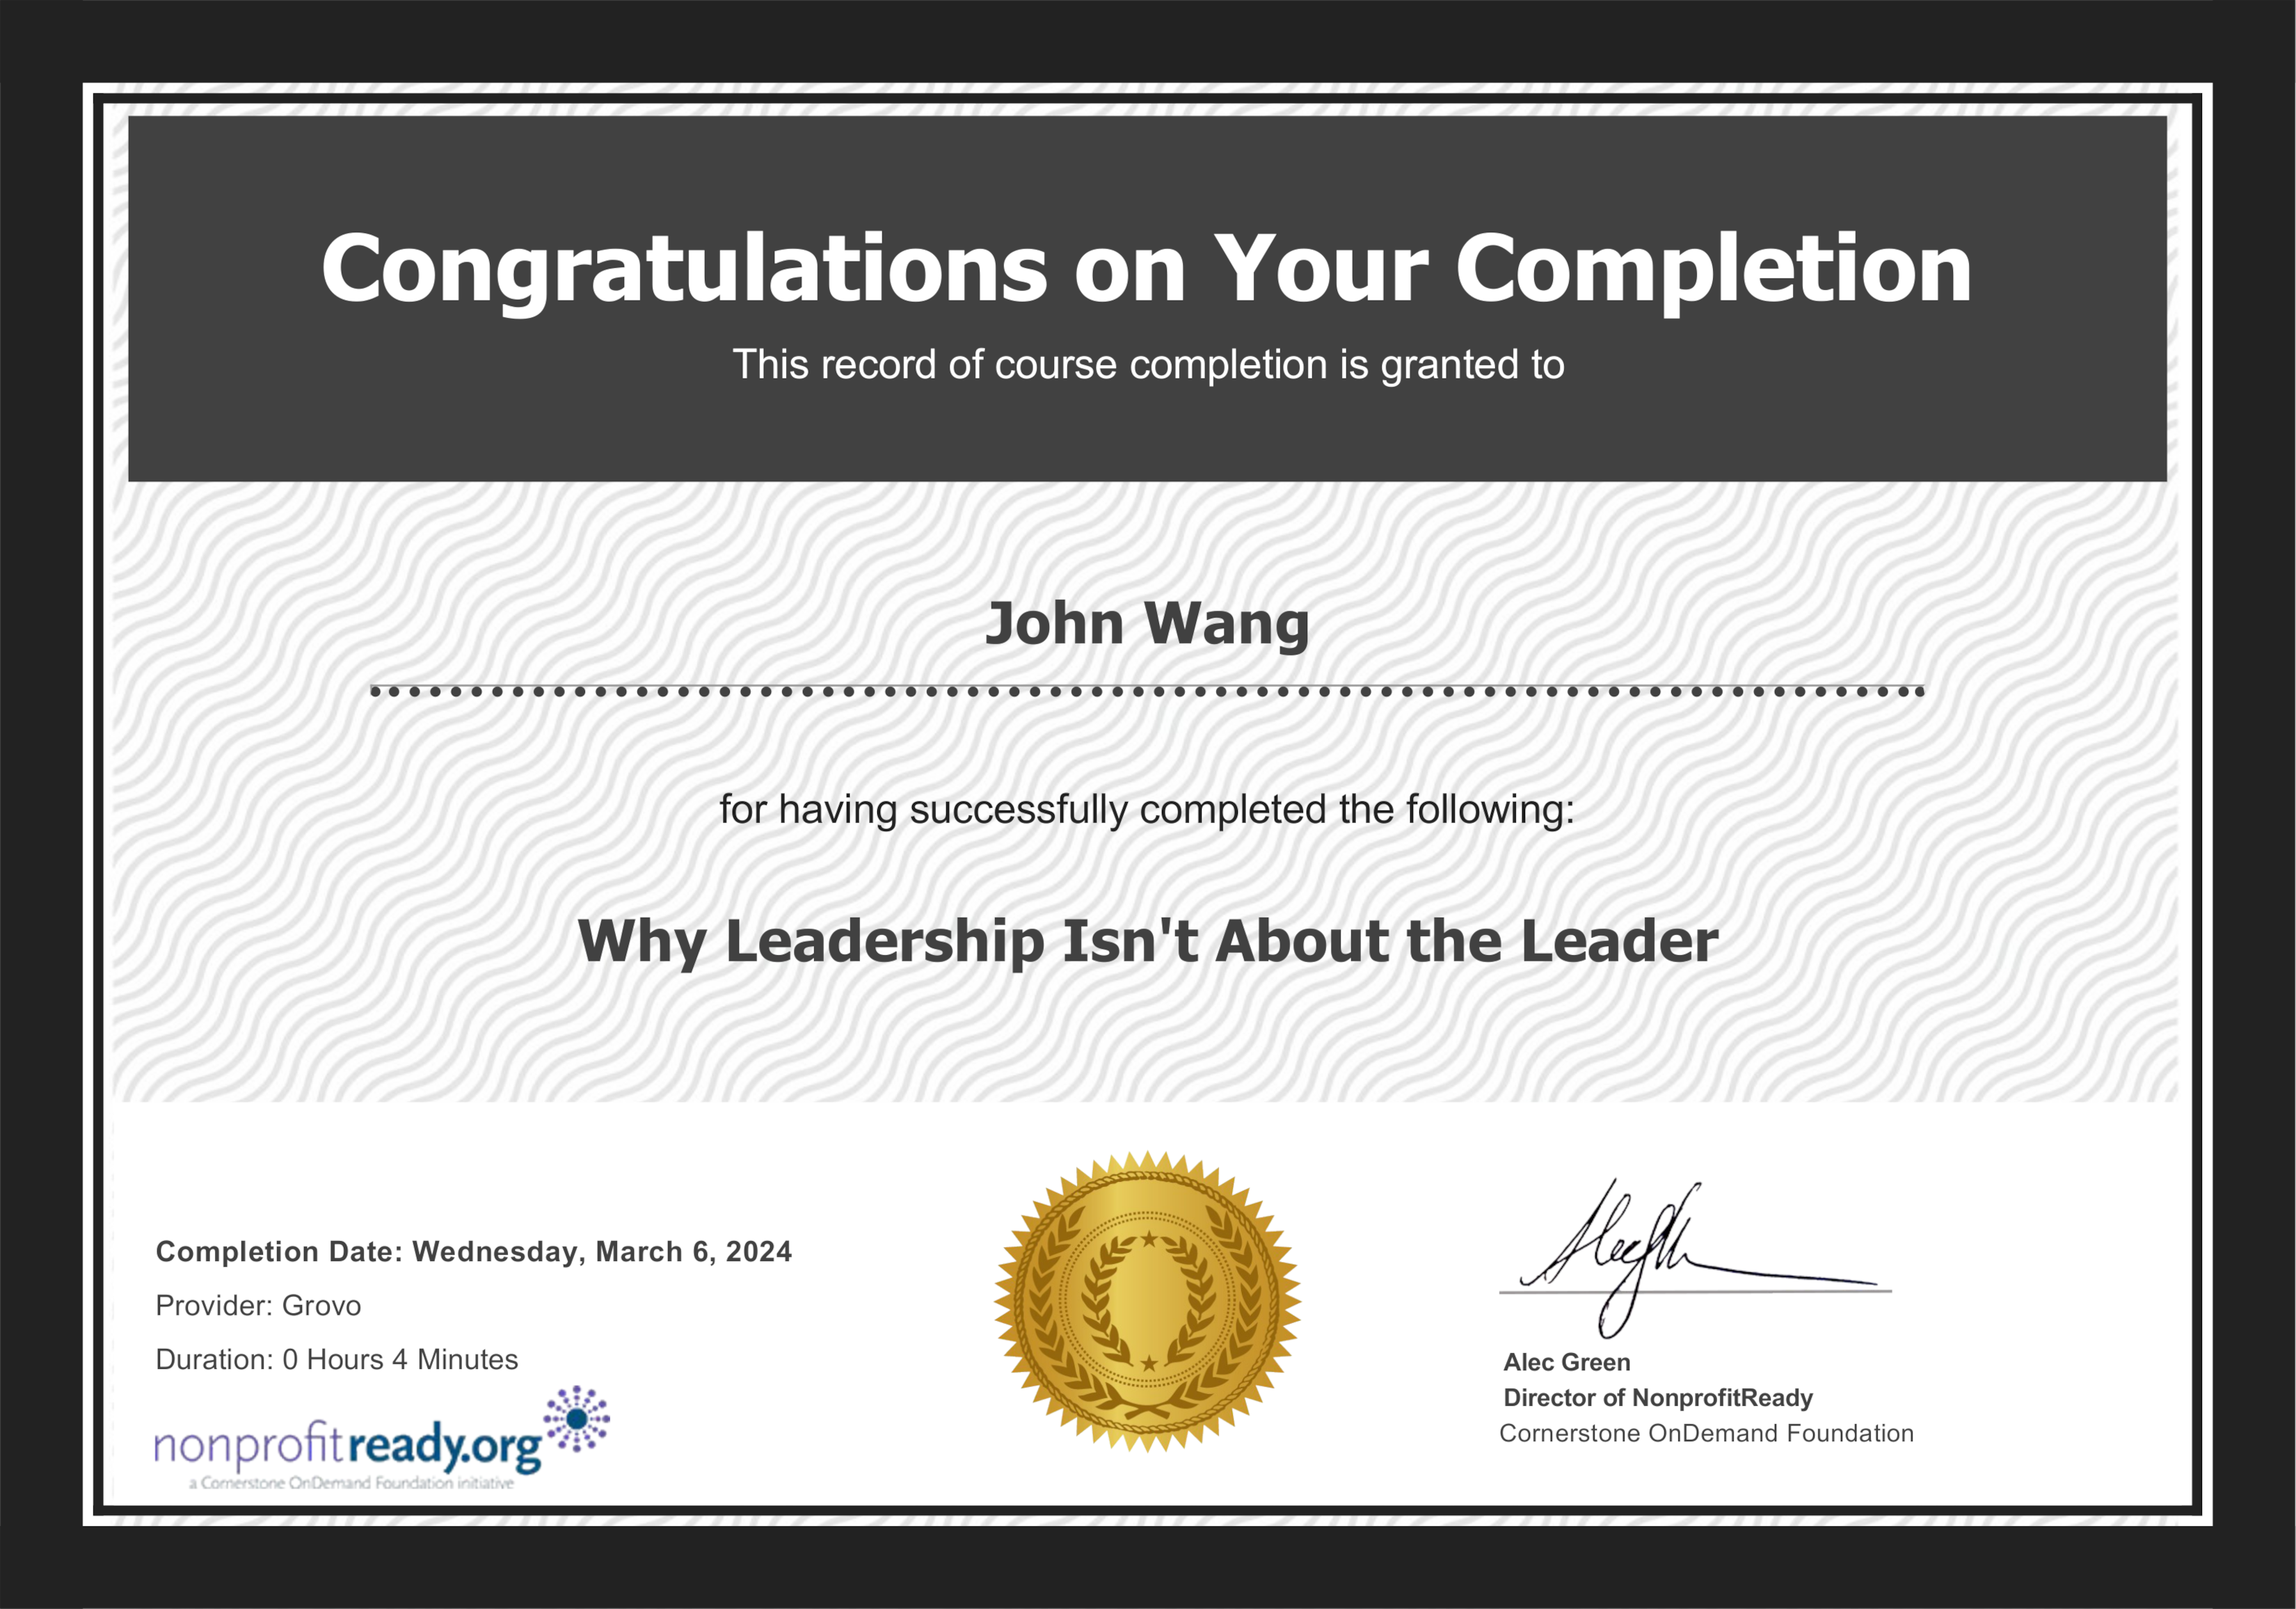 John's Why Leadership Isn't About the Leader from NonprofitReady